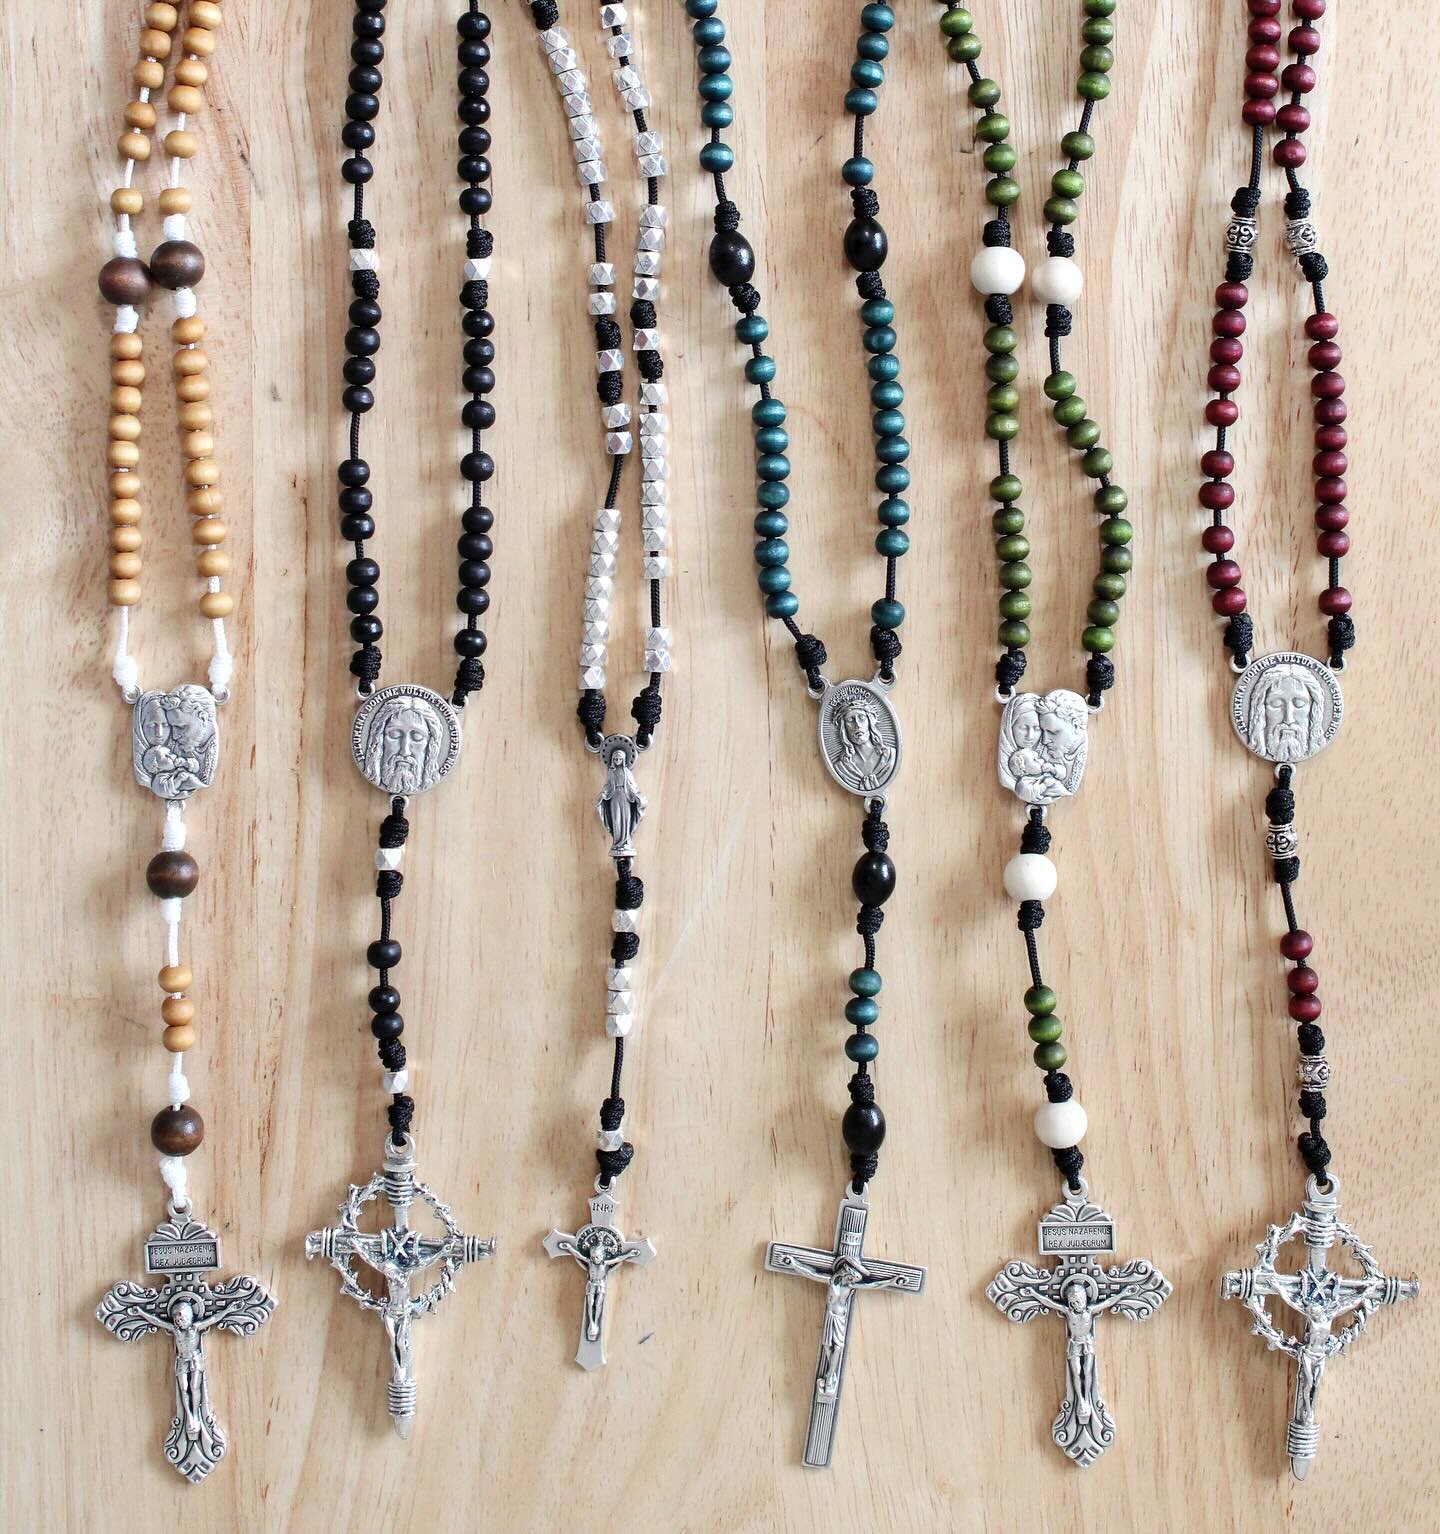 ..collection.. | #marchmeetthemaker

My inventory of cord &amp; bead rosaries had been depleted for a while, but I added six new ones to the collection in the big update last week!

Feel free to contribute to depleting my stock again! 😜
https://www.